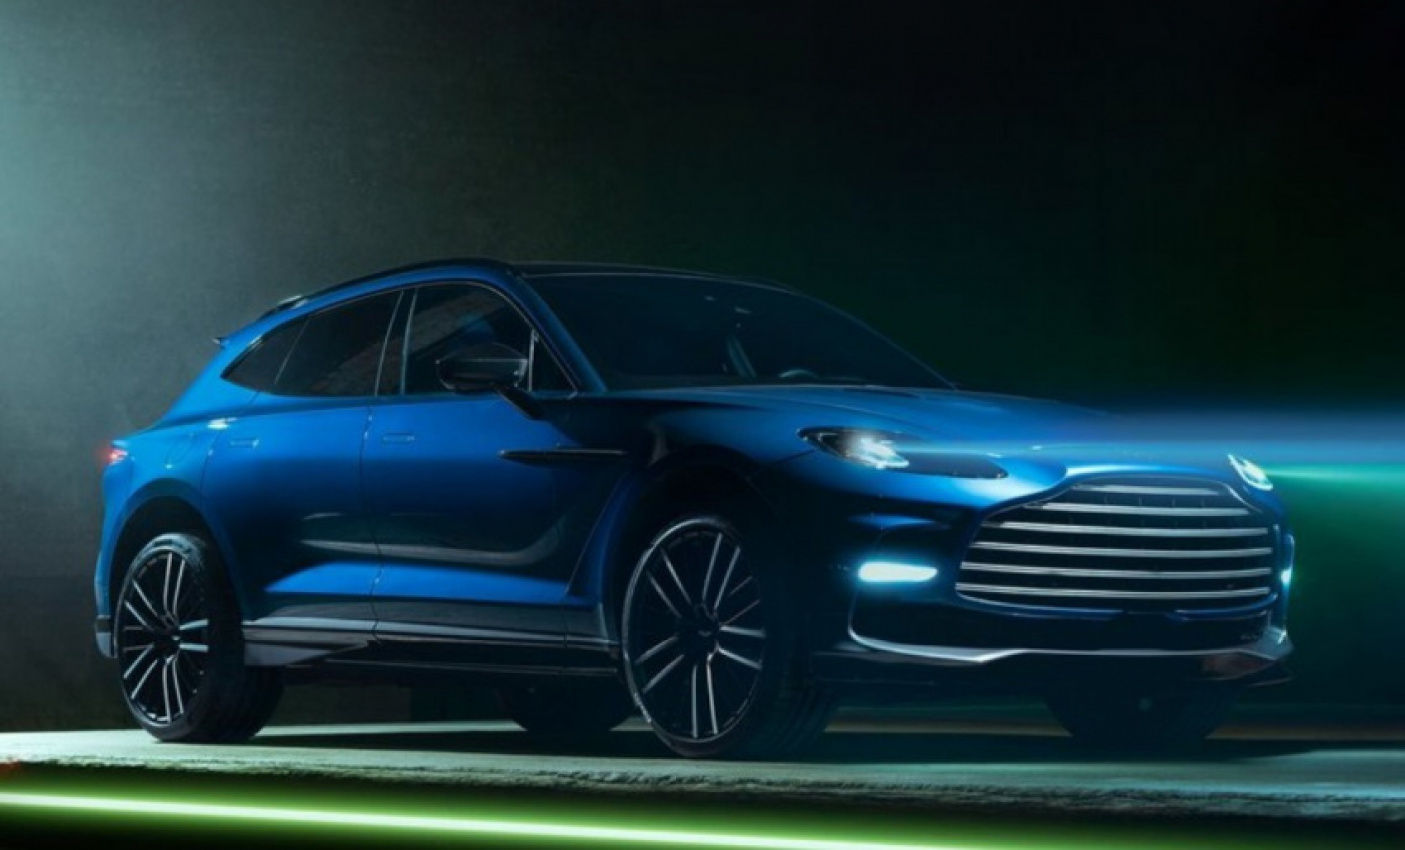 aston martin, autos, cars, automotive industry, car, cars, driven, driven nz, electric cars, hybrid, motoring, new zealand, news, nz, aston martin will stop making pure combustion vehicles by 2026